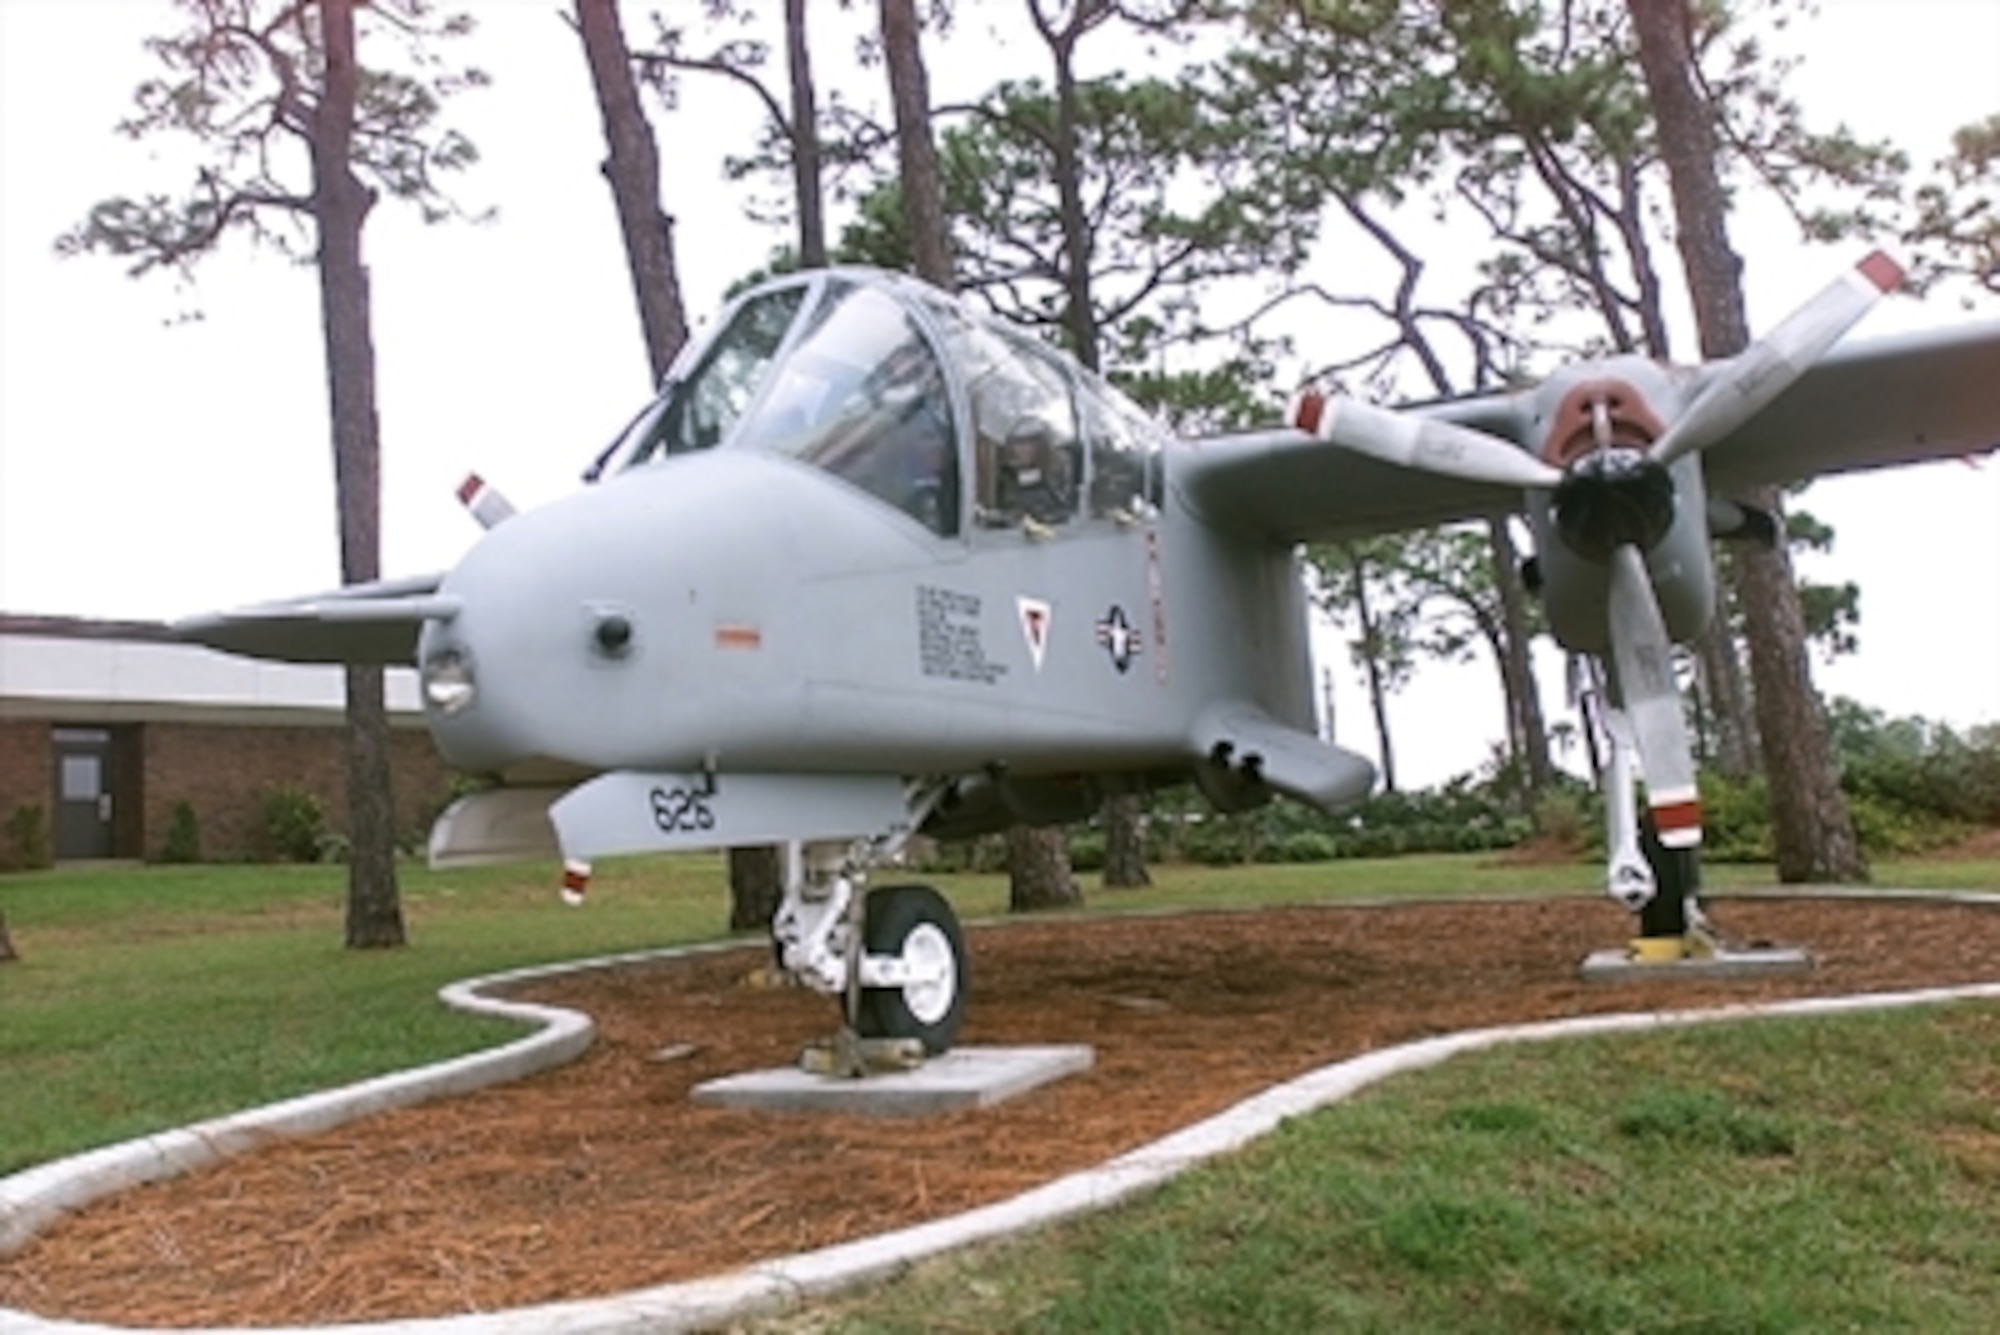 The OV-10A was a twin-turboprop short takeoff and landing aircraft conceived by the U.S. Marine Corps and developed under a U.S. Air Force, Navy and Marine Corps tri-service program. The first production OV-10A was ordered in 1966, and its initial flight took place in August 1967.